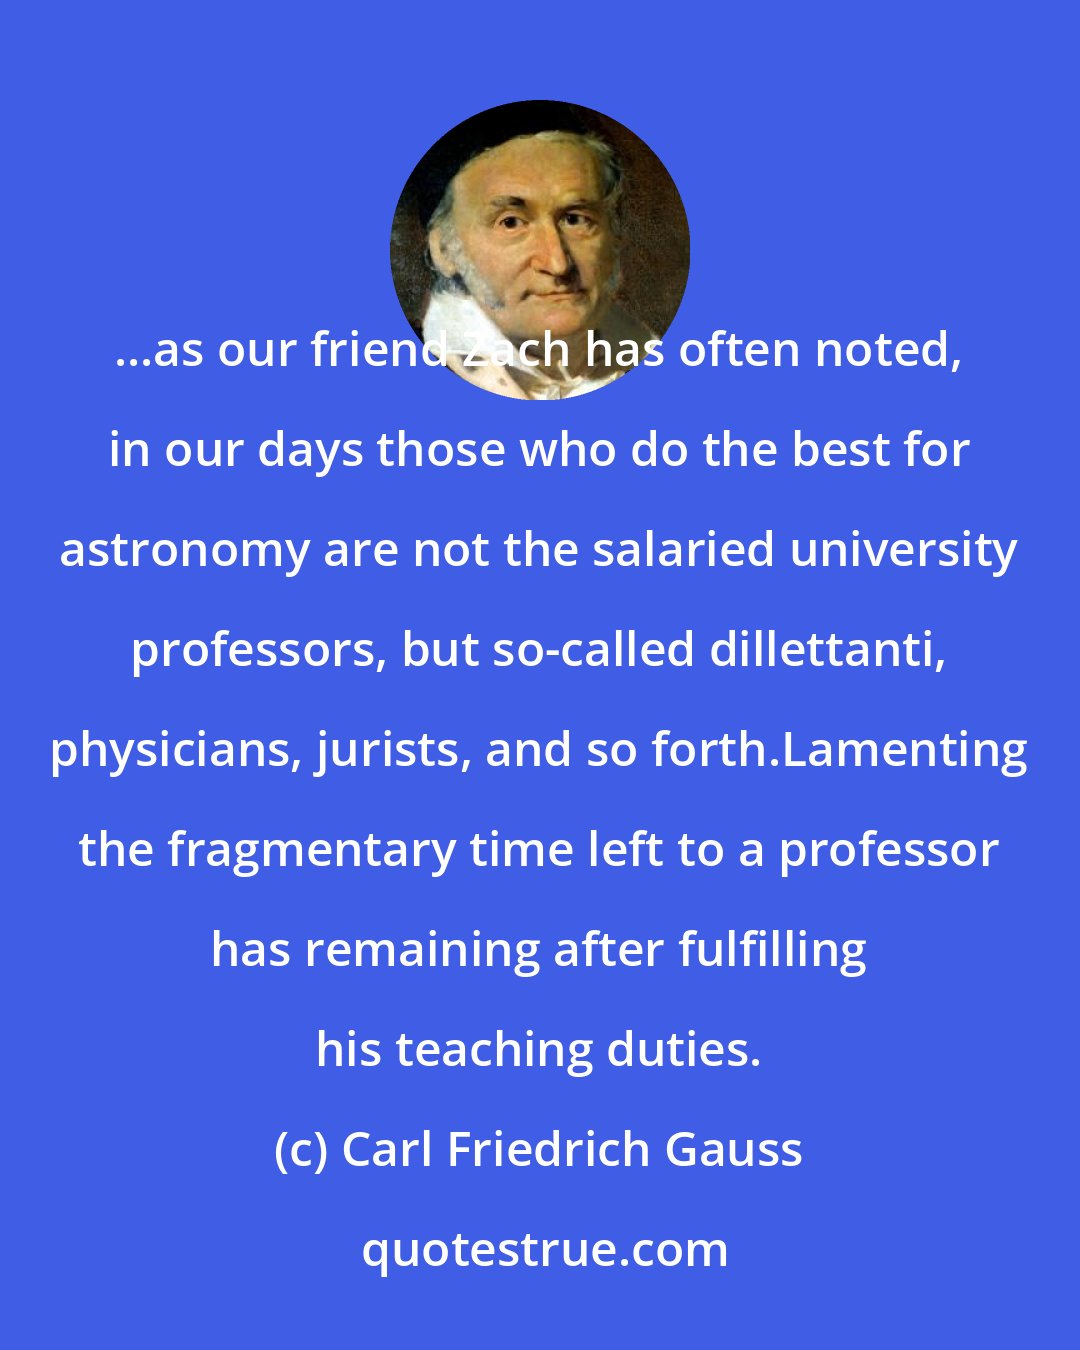 Carl Friedrich Gauss: ...as our friend Zach has often noted, in our days those who do the best for astronomy are not the salaried university professors, but so-called dillettanti, physicians, jurists, and so forth.Lamenting the fragmentary time left to a professor has remaining after fulfilling his teaching duties.